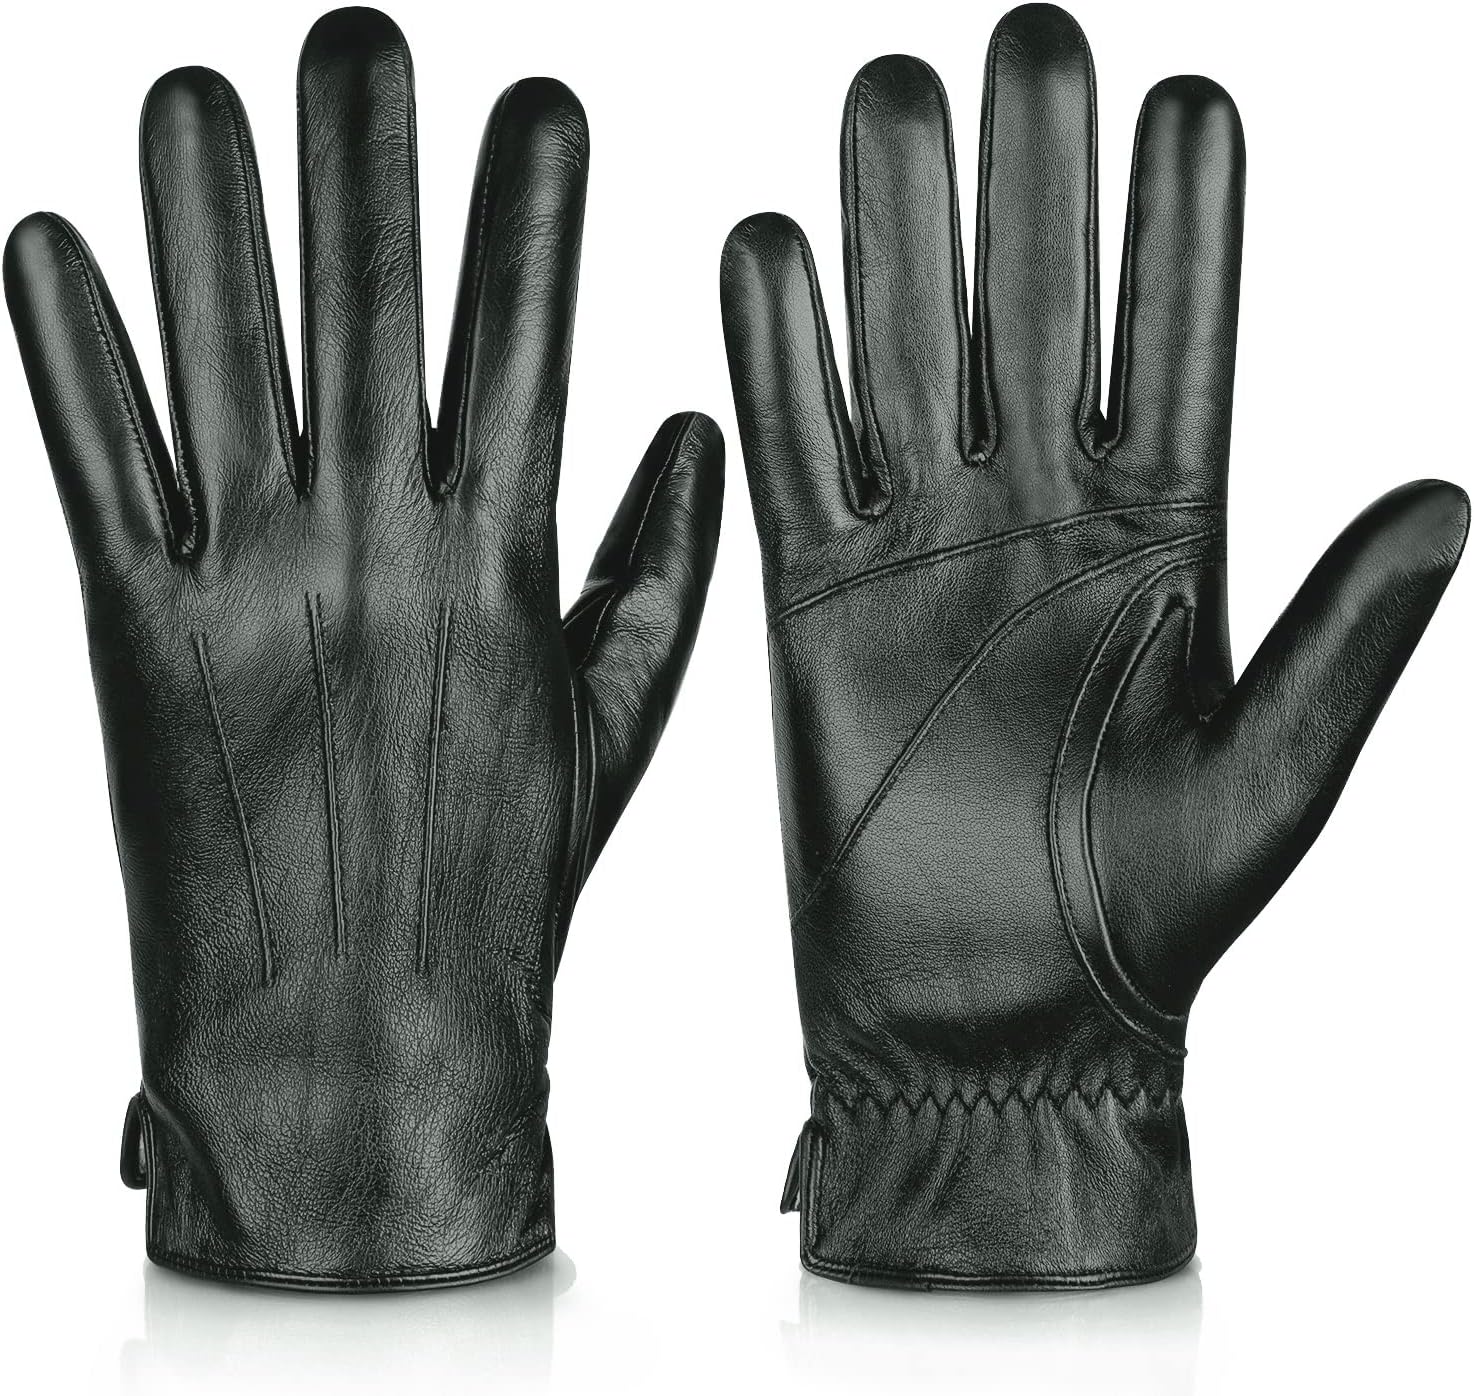 Grab Your Alepo Genuine Sheepskin Leather Gloves for Men at a Discounted Price